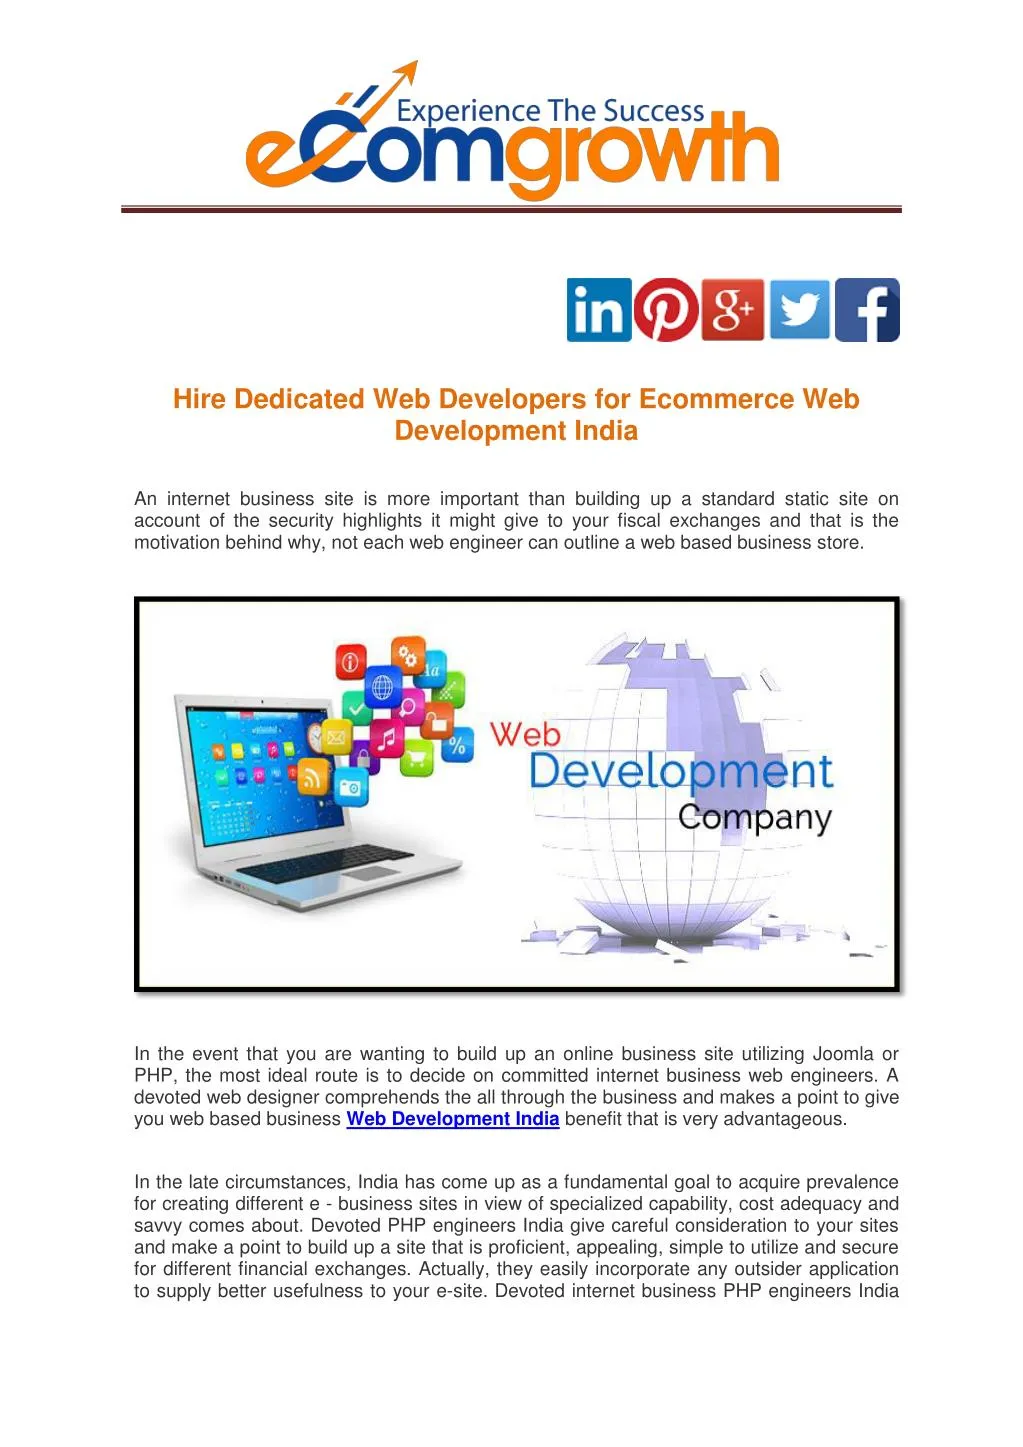 hire dedicated web developers for ecommerce